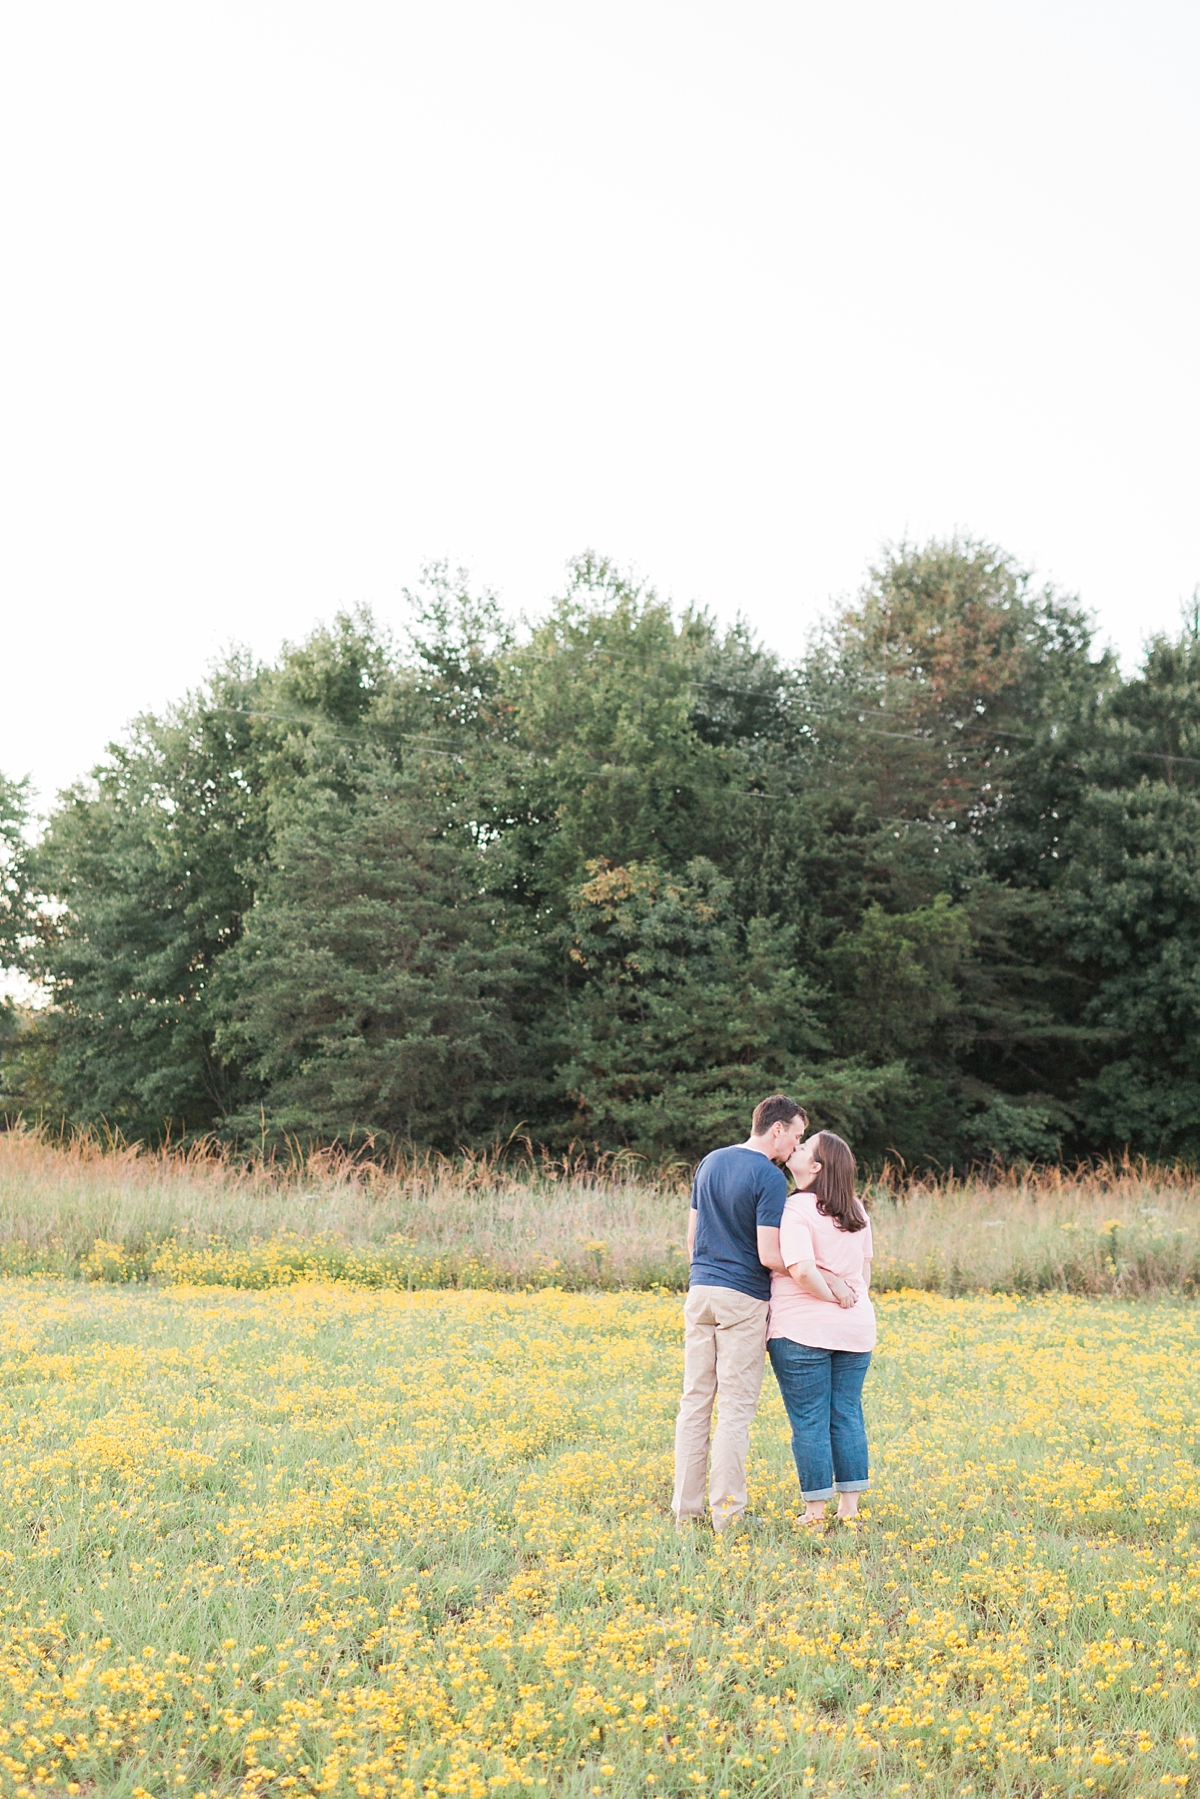 A rustic engagement session during sunset's golden hour in Manassas Battlefield Park of Virginia, just an hour west of Washington, DC.